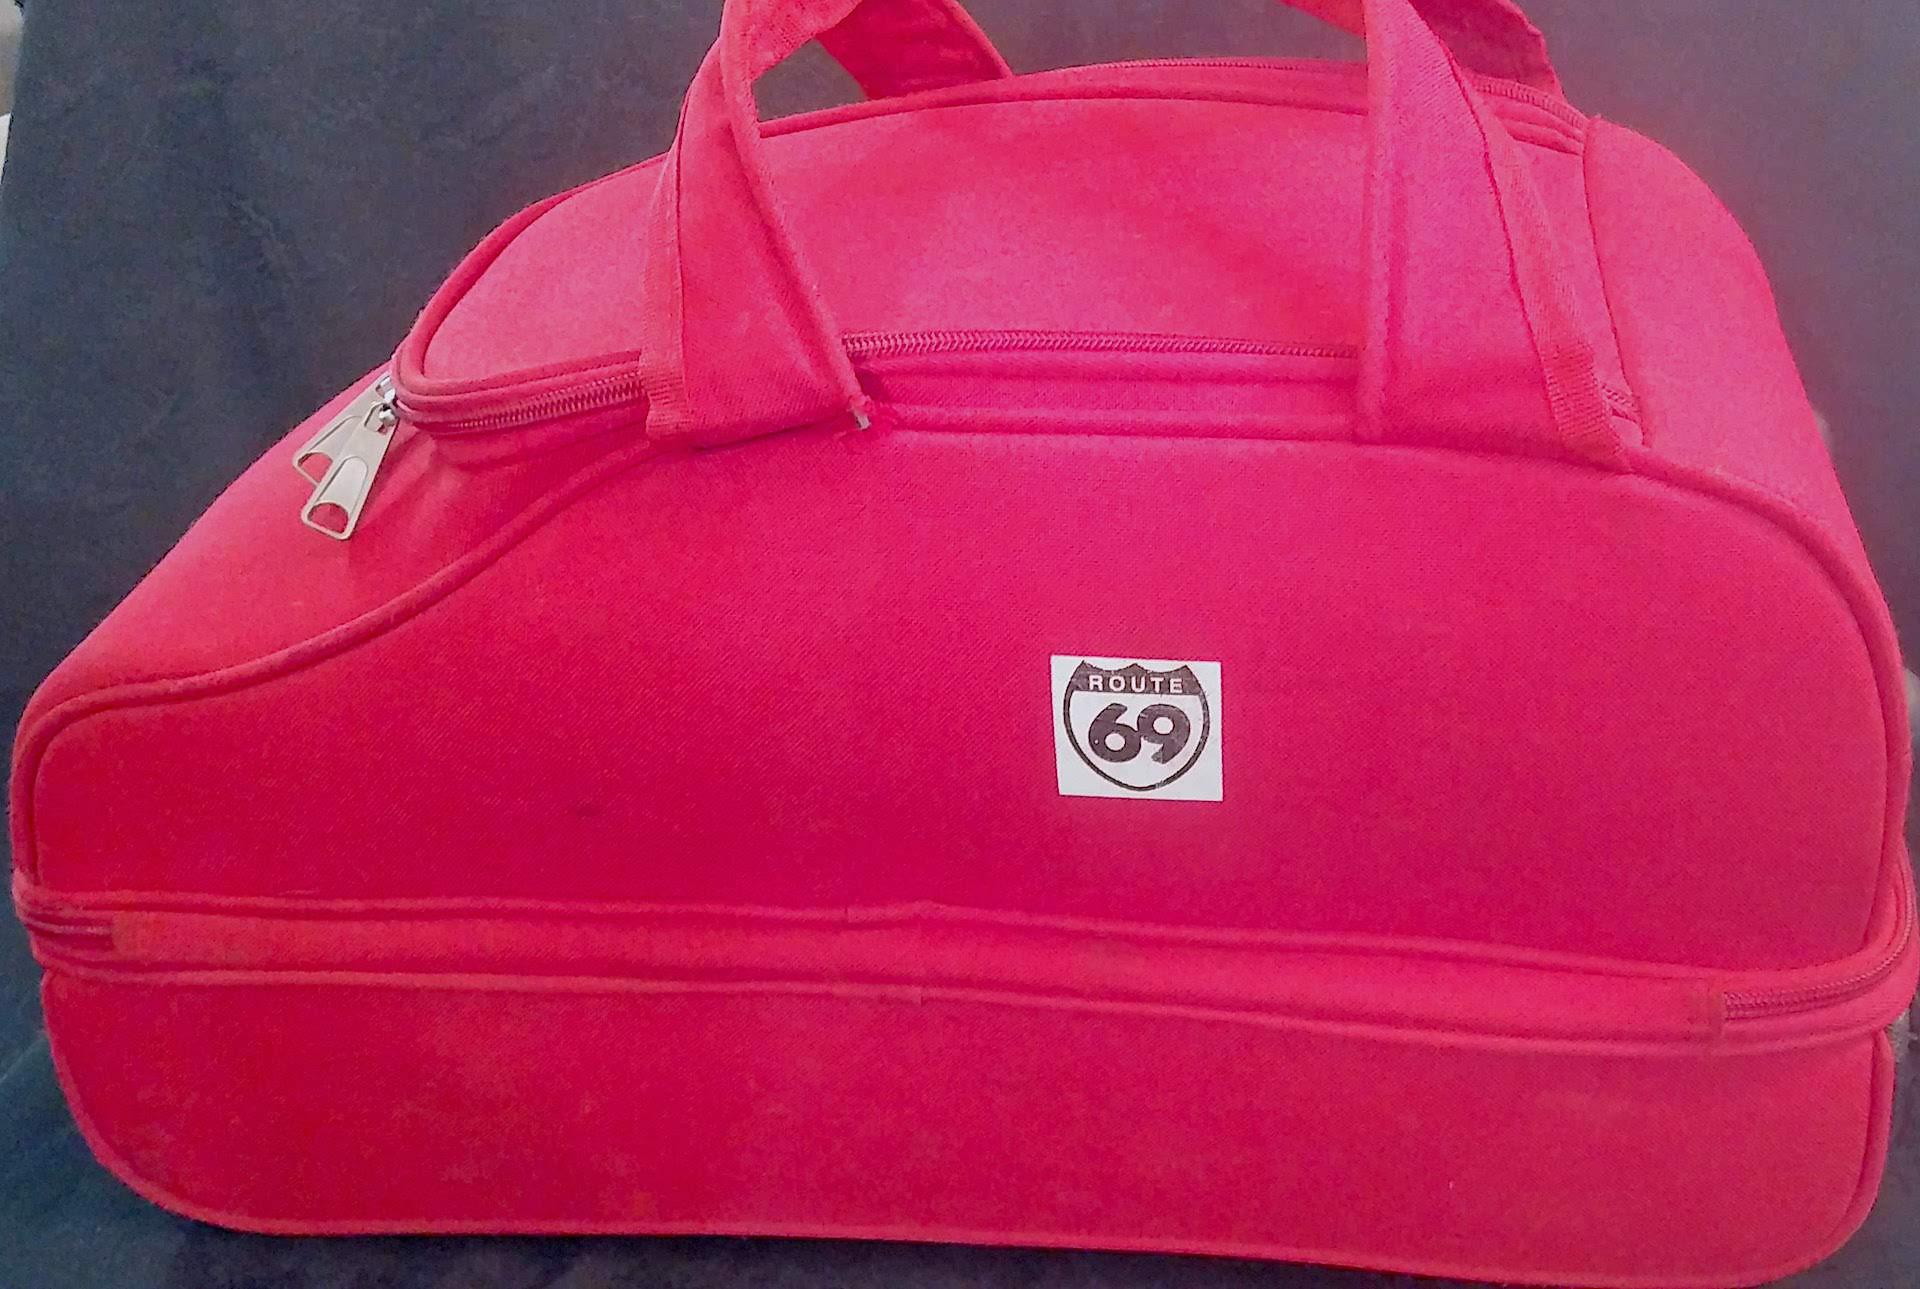 Accessories - Baggage - Unisex; Red Route 69 Luggage